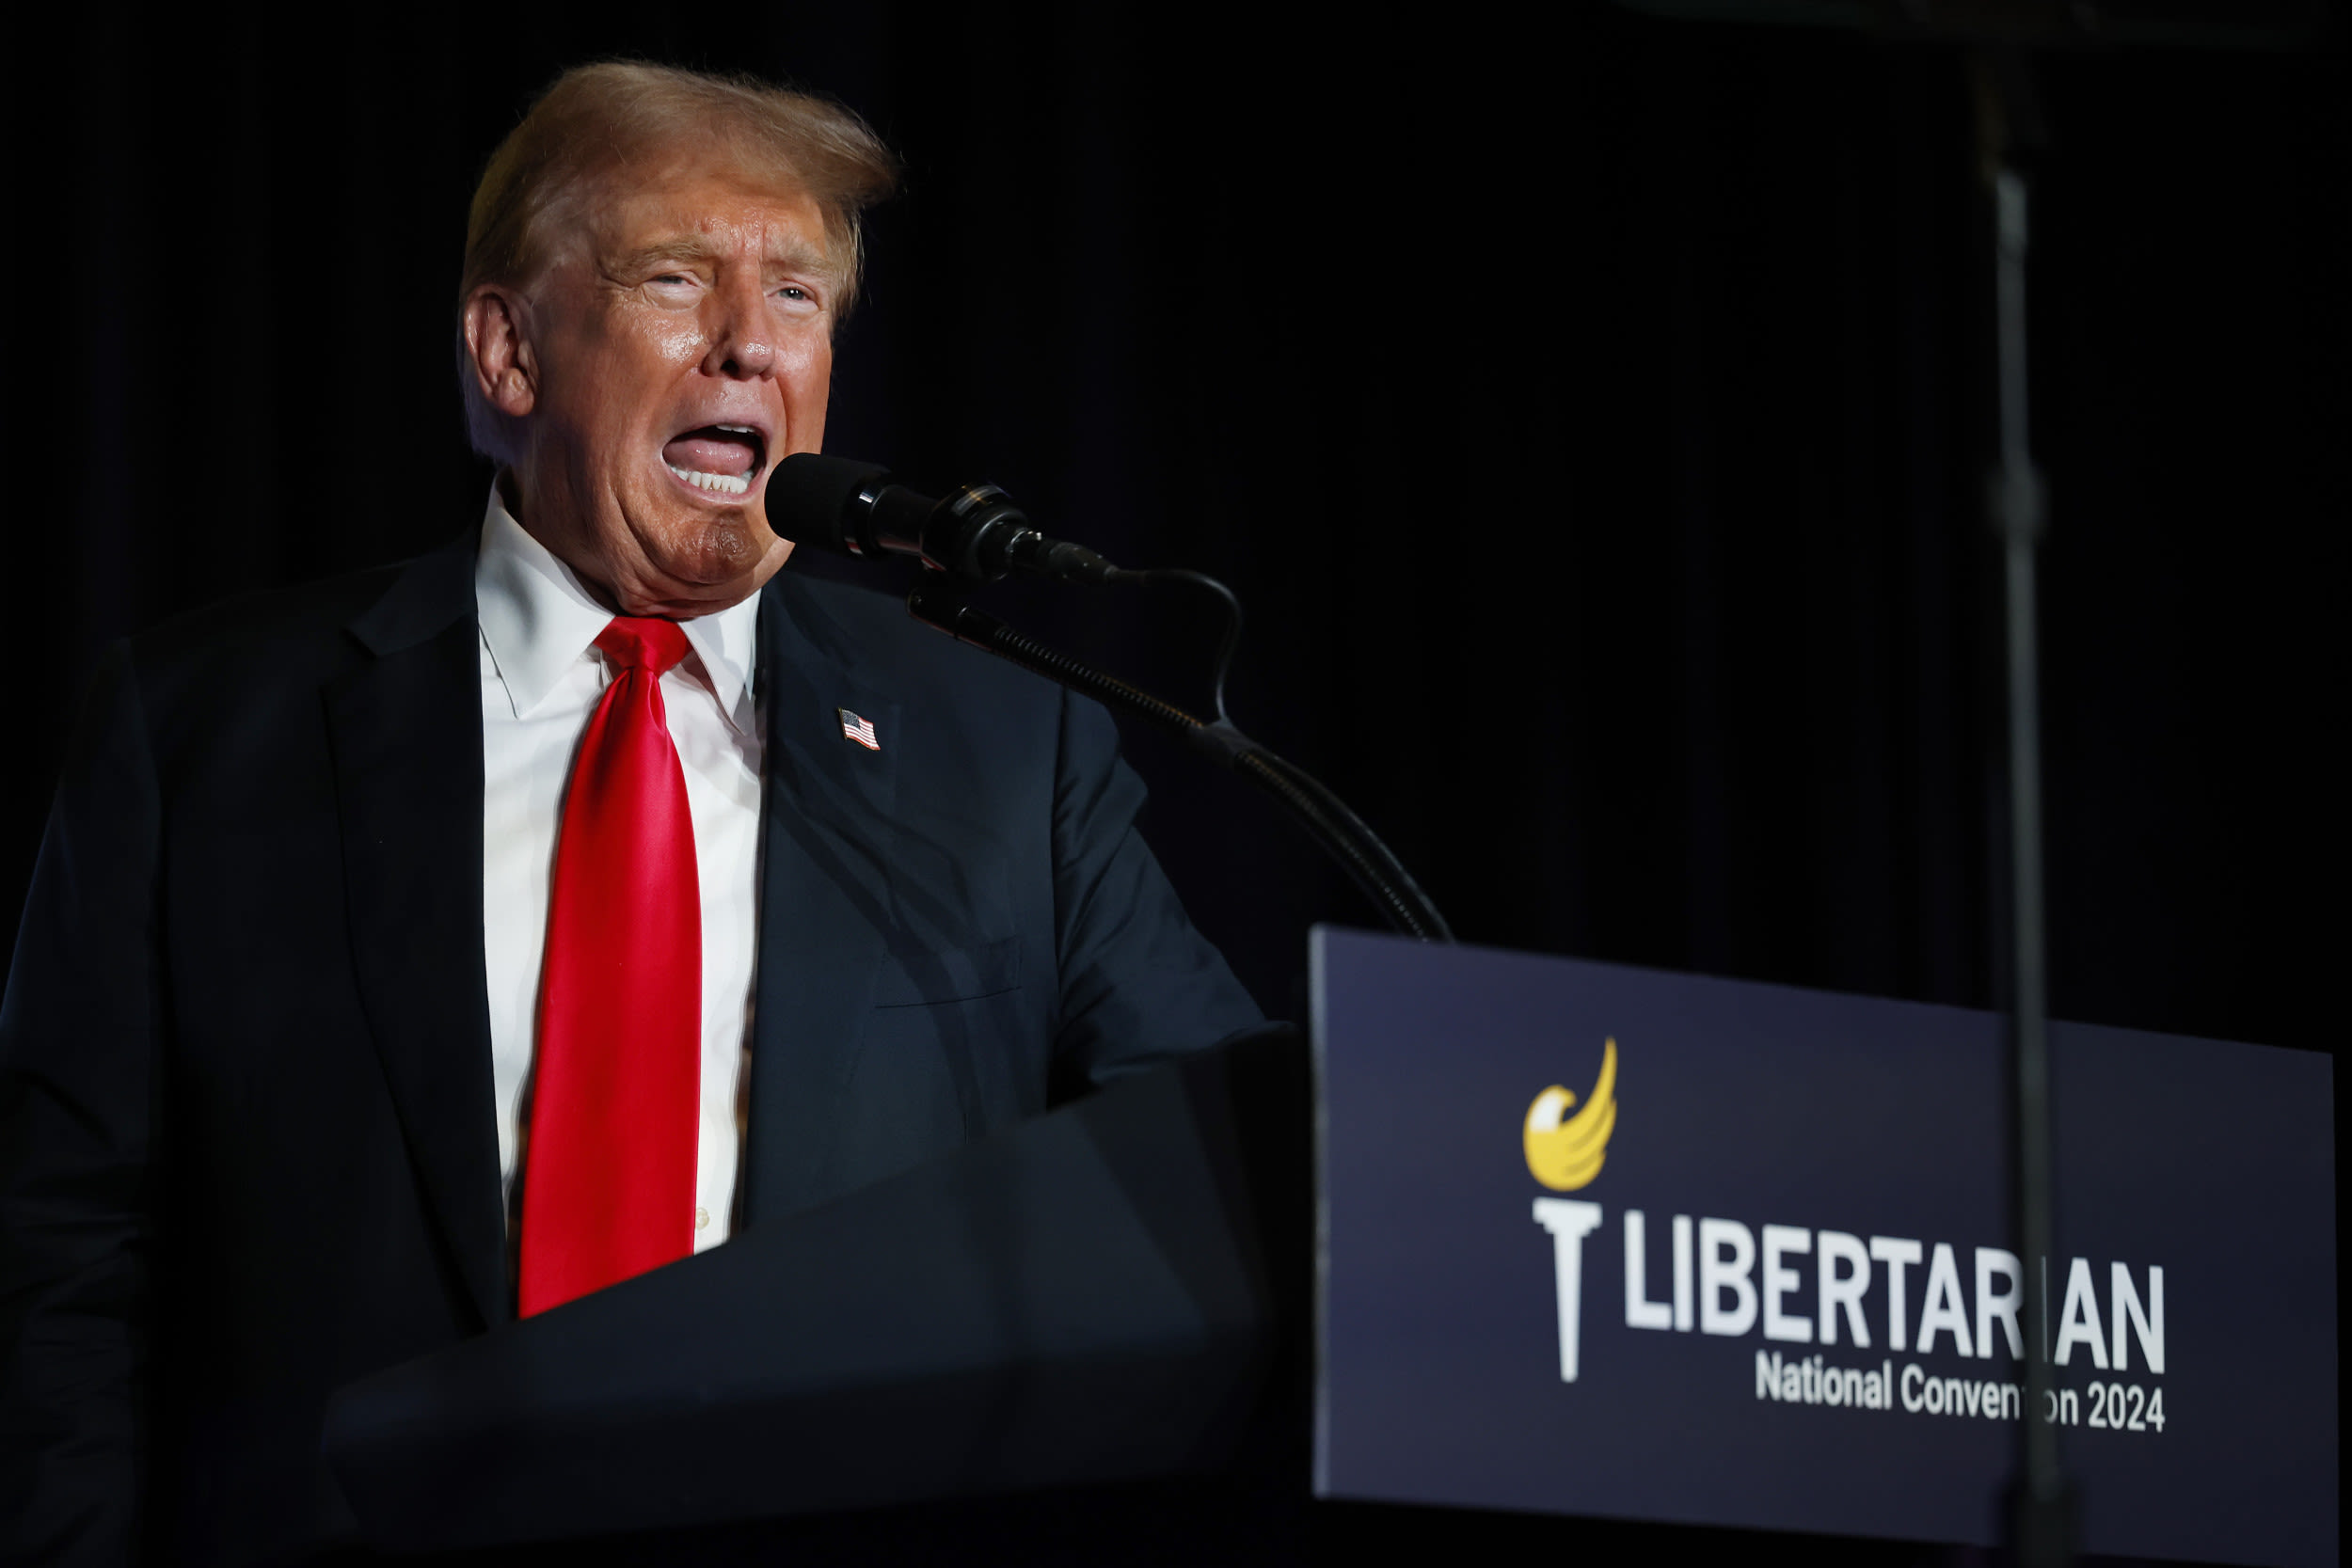 Donald Trump's Libertarian Convention appearance goes off script